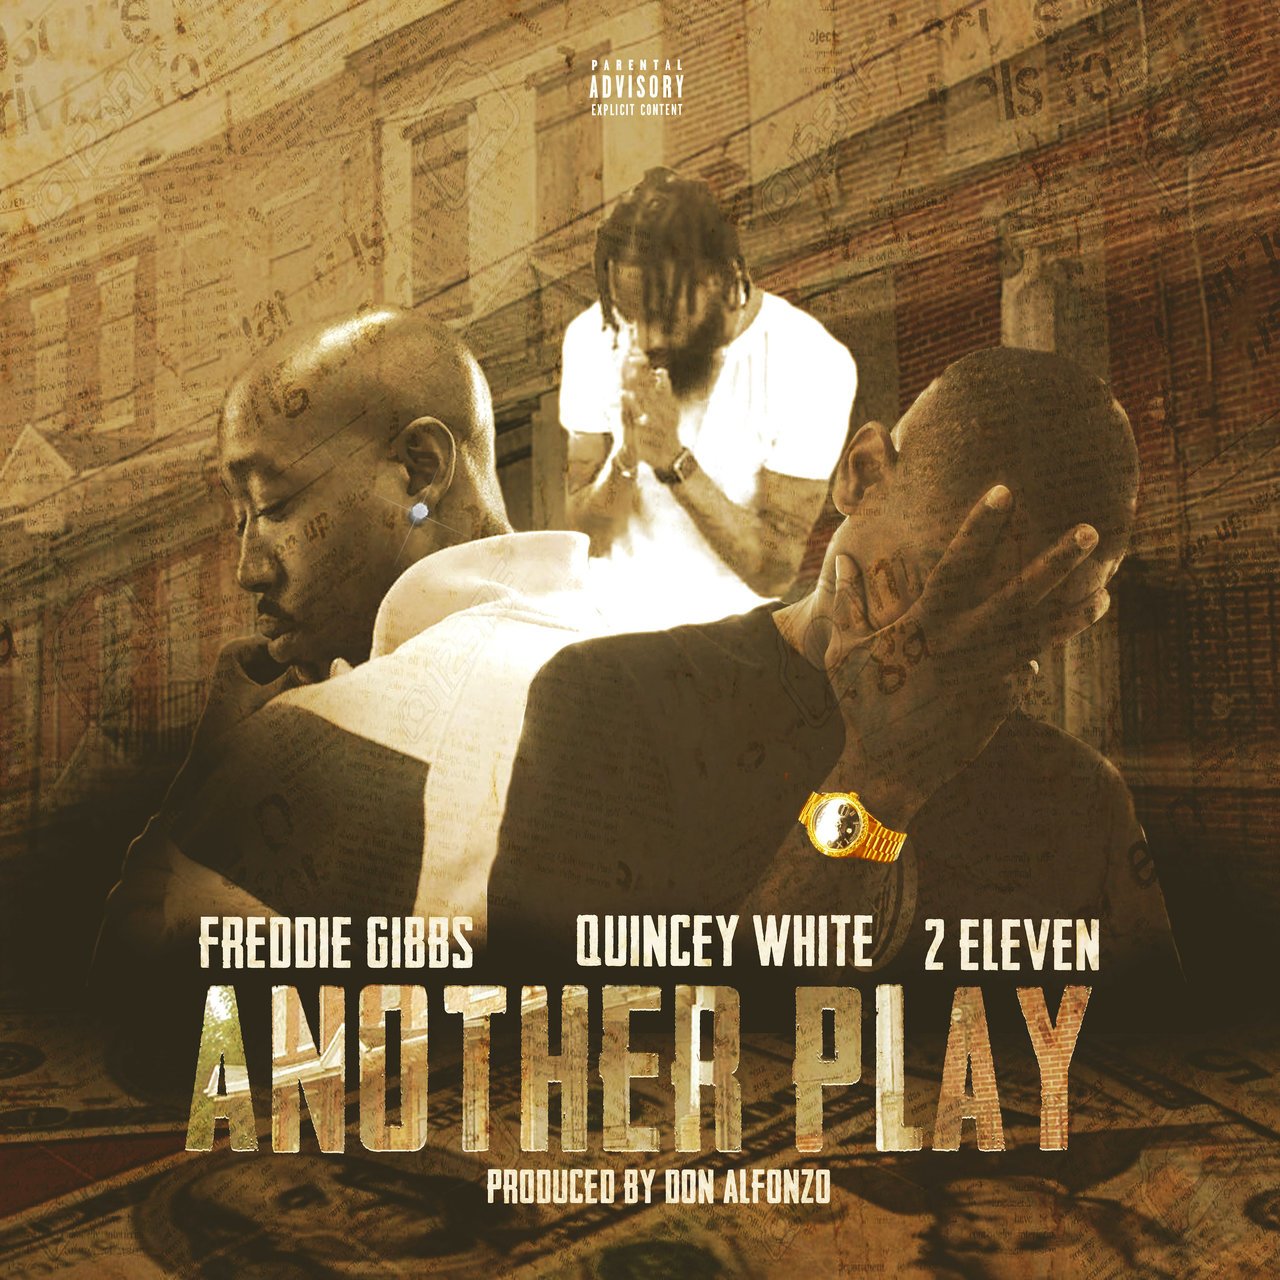 2 Eleven Links Up With Freddie Gibbs & Quincey White On “Another Play”